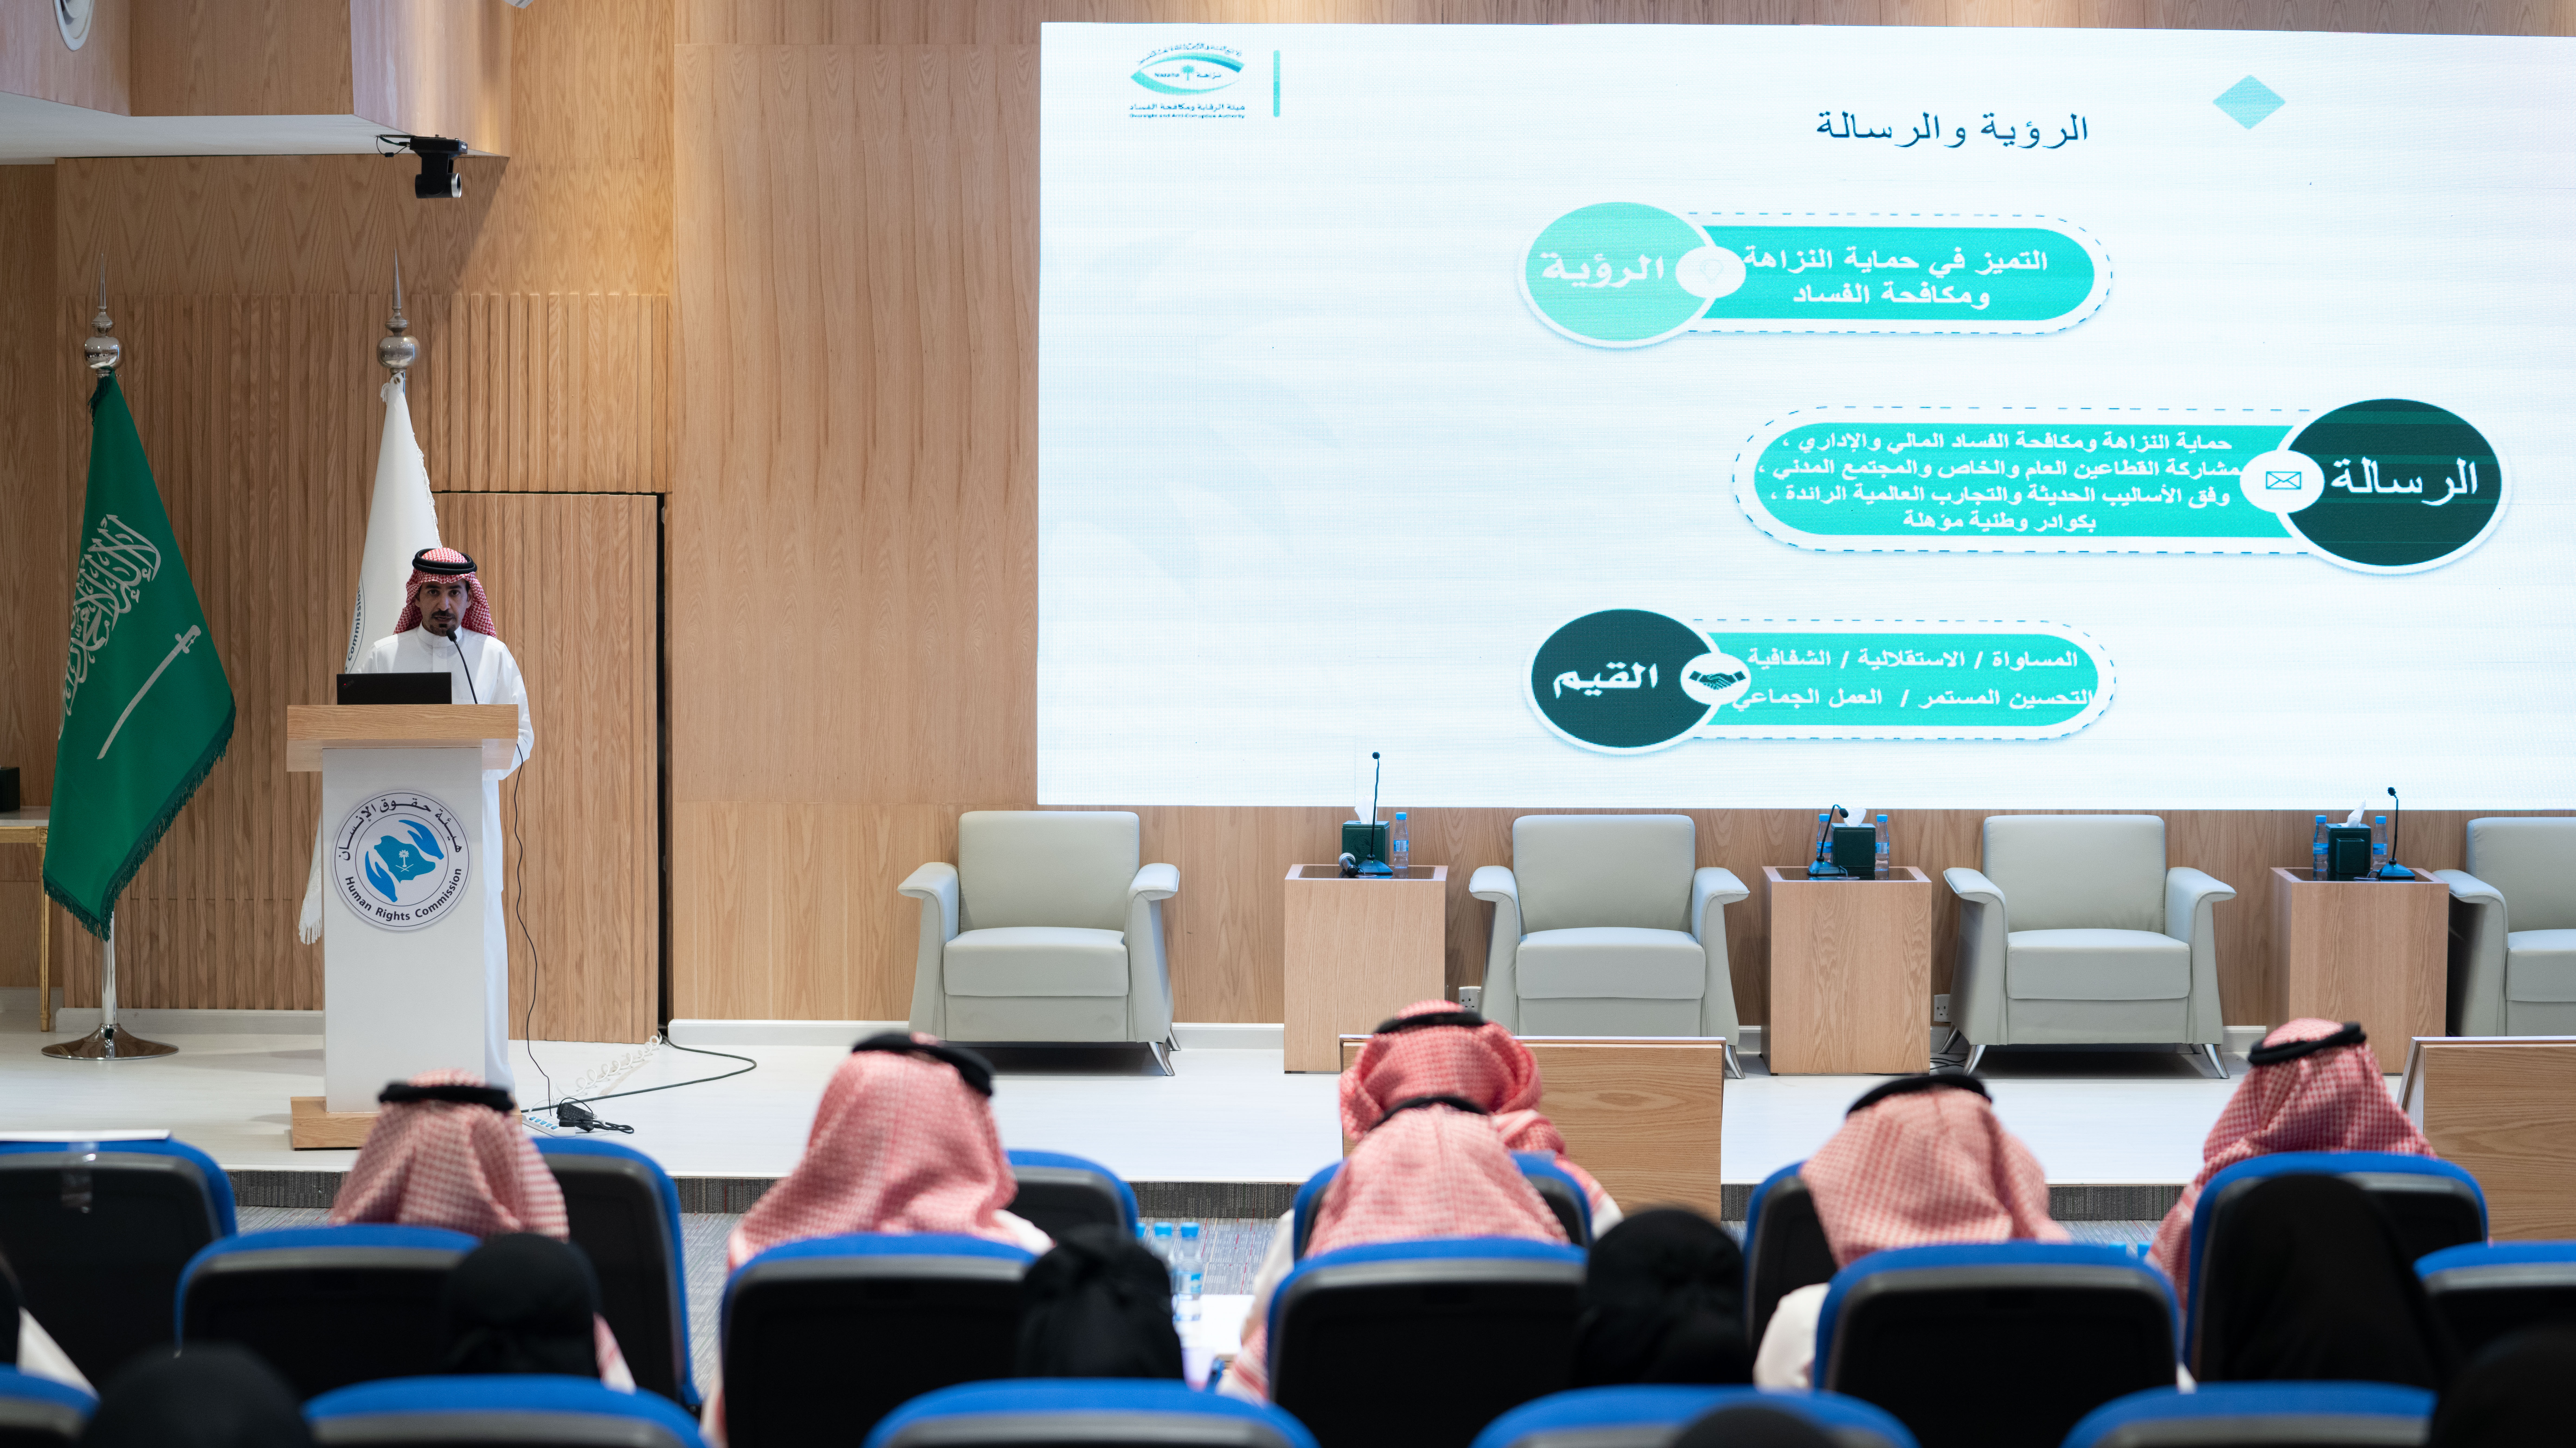 The Human Rights Commission and the National Anti-Corruption Commission (Nazaha) highlighted the importance of governance and integrity in combating corruption